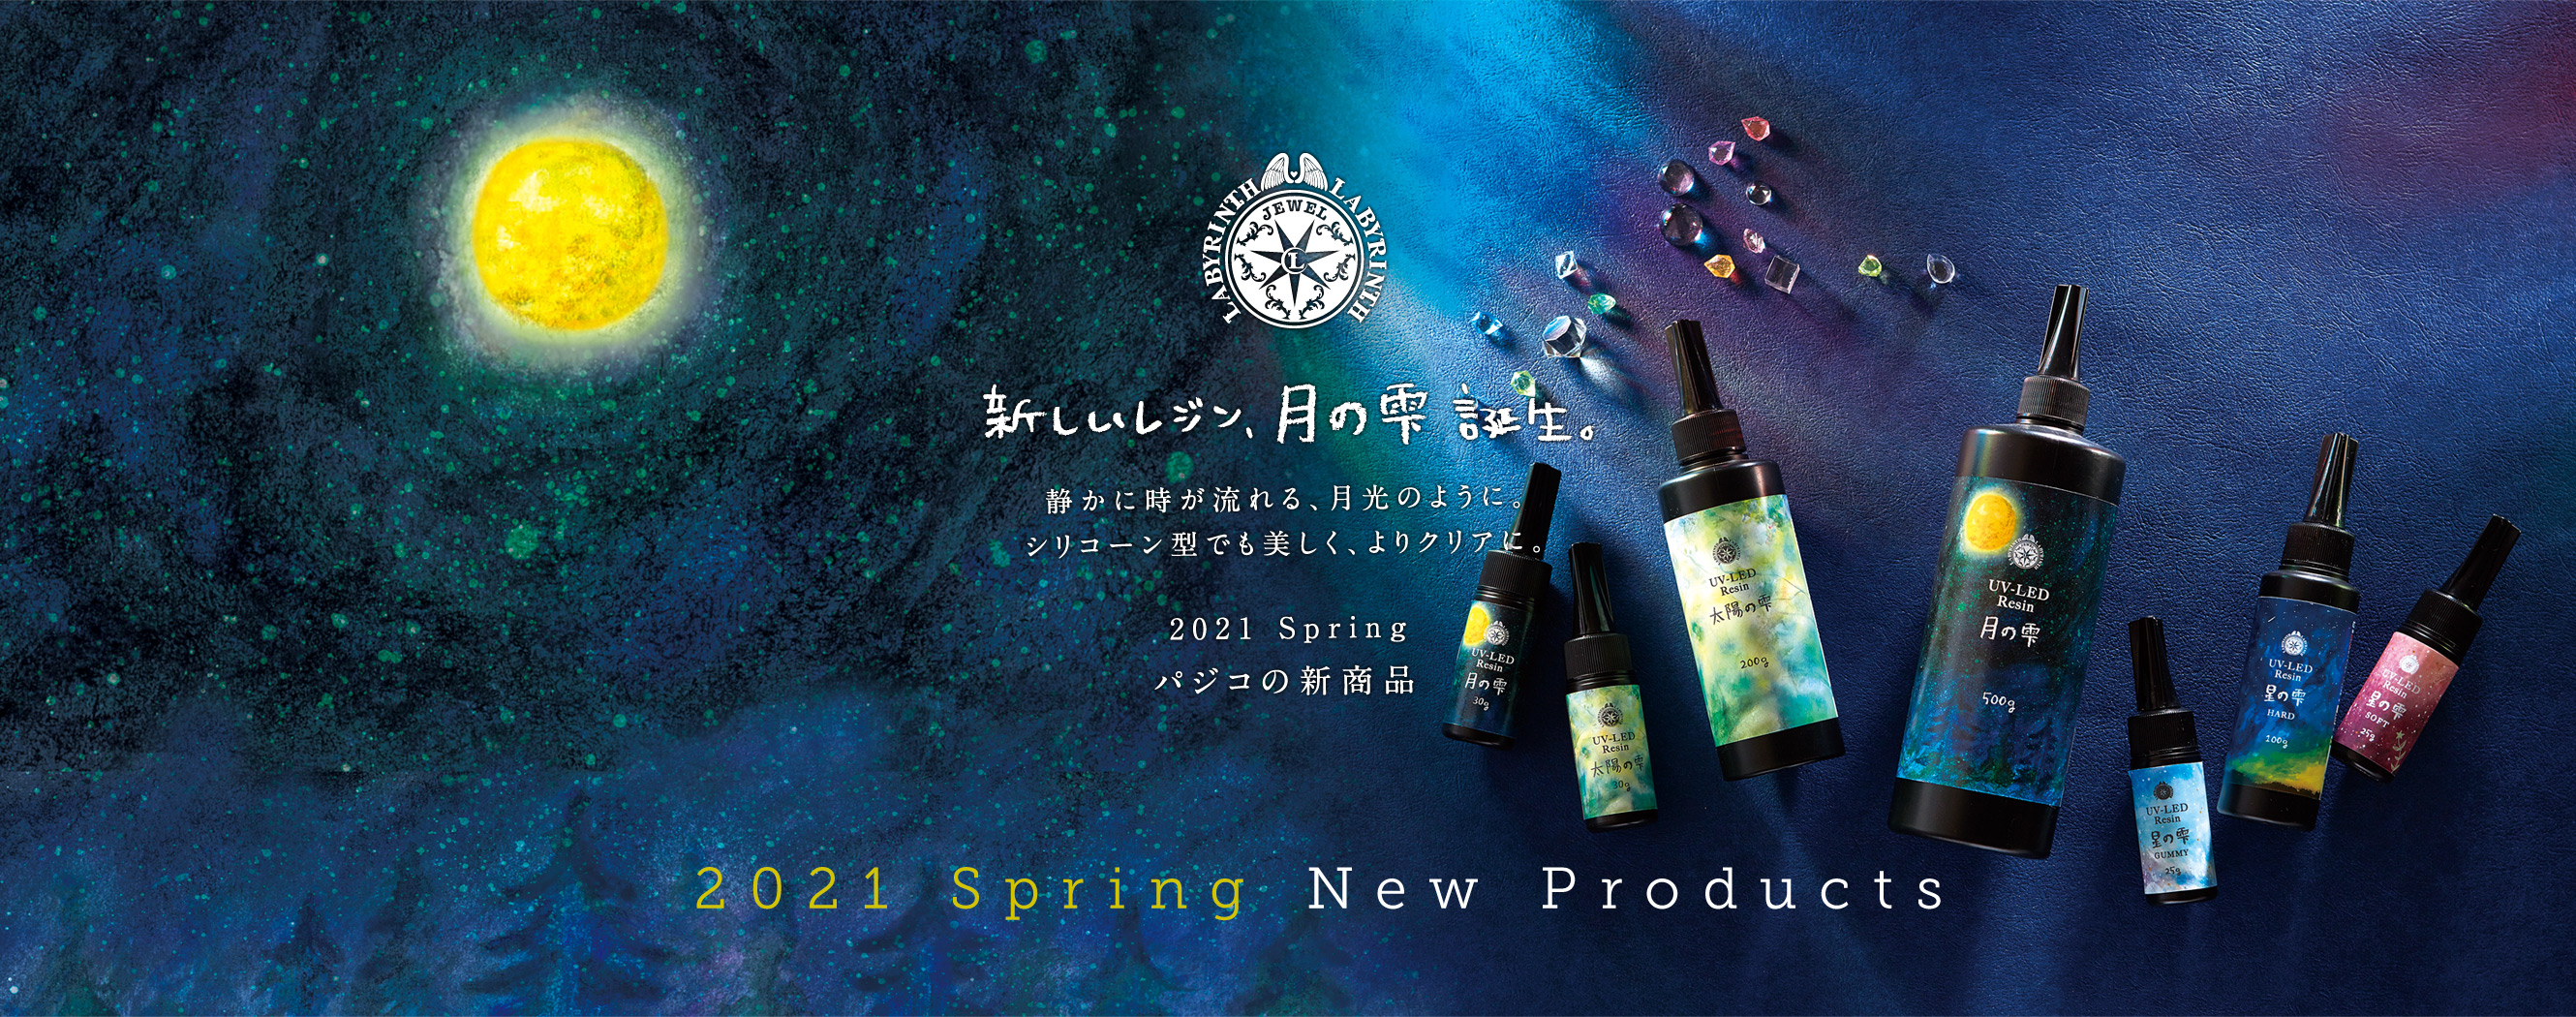 2021 Spring New Products